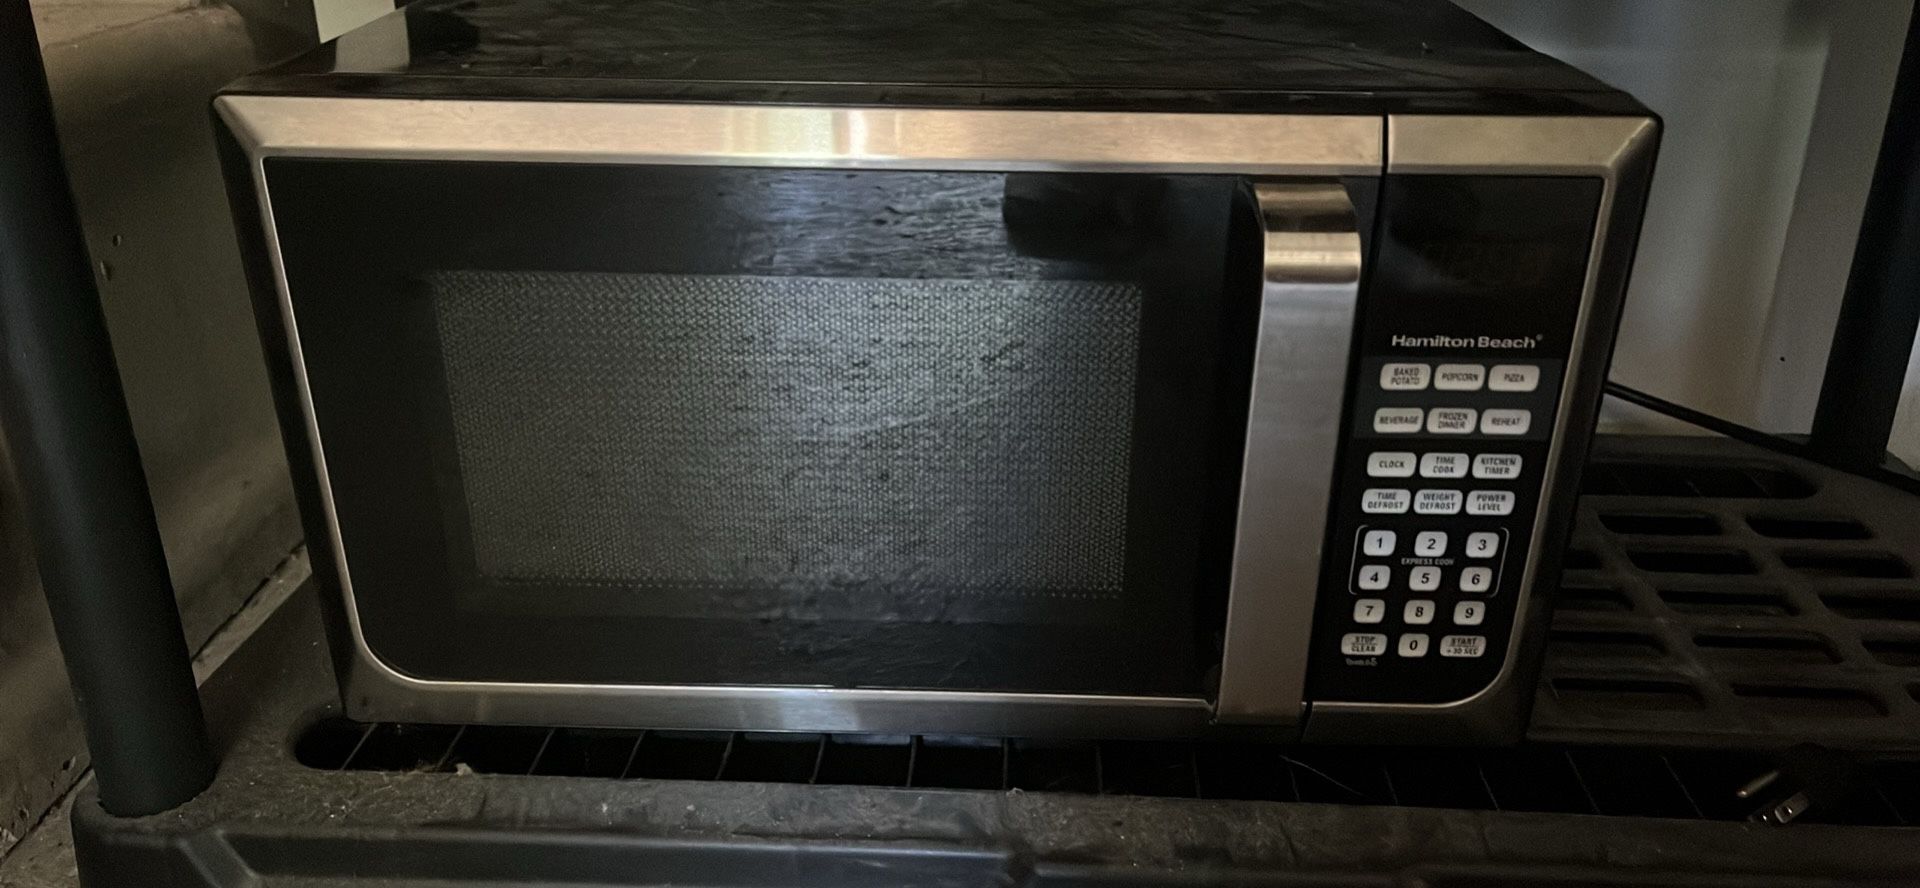 Microwave Barely Used